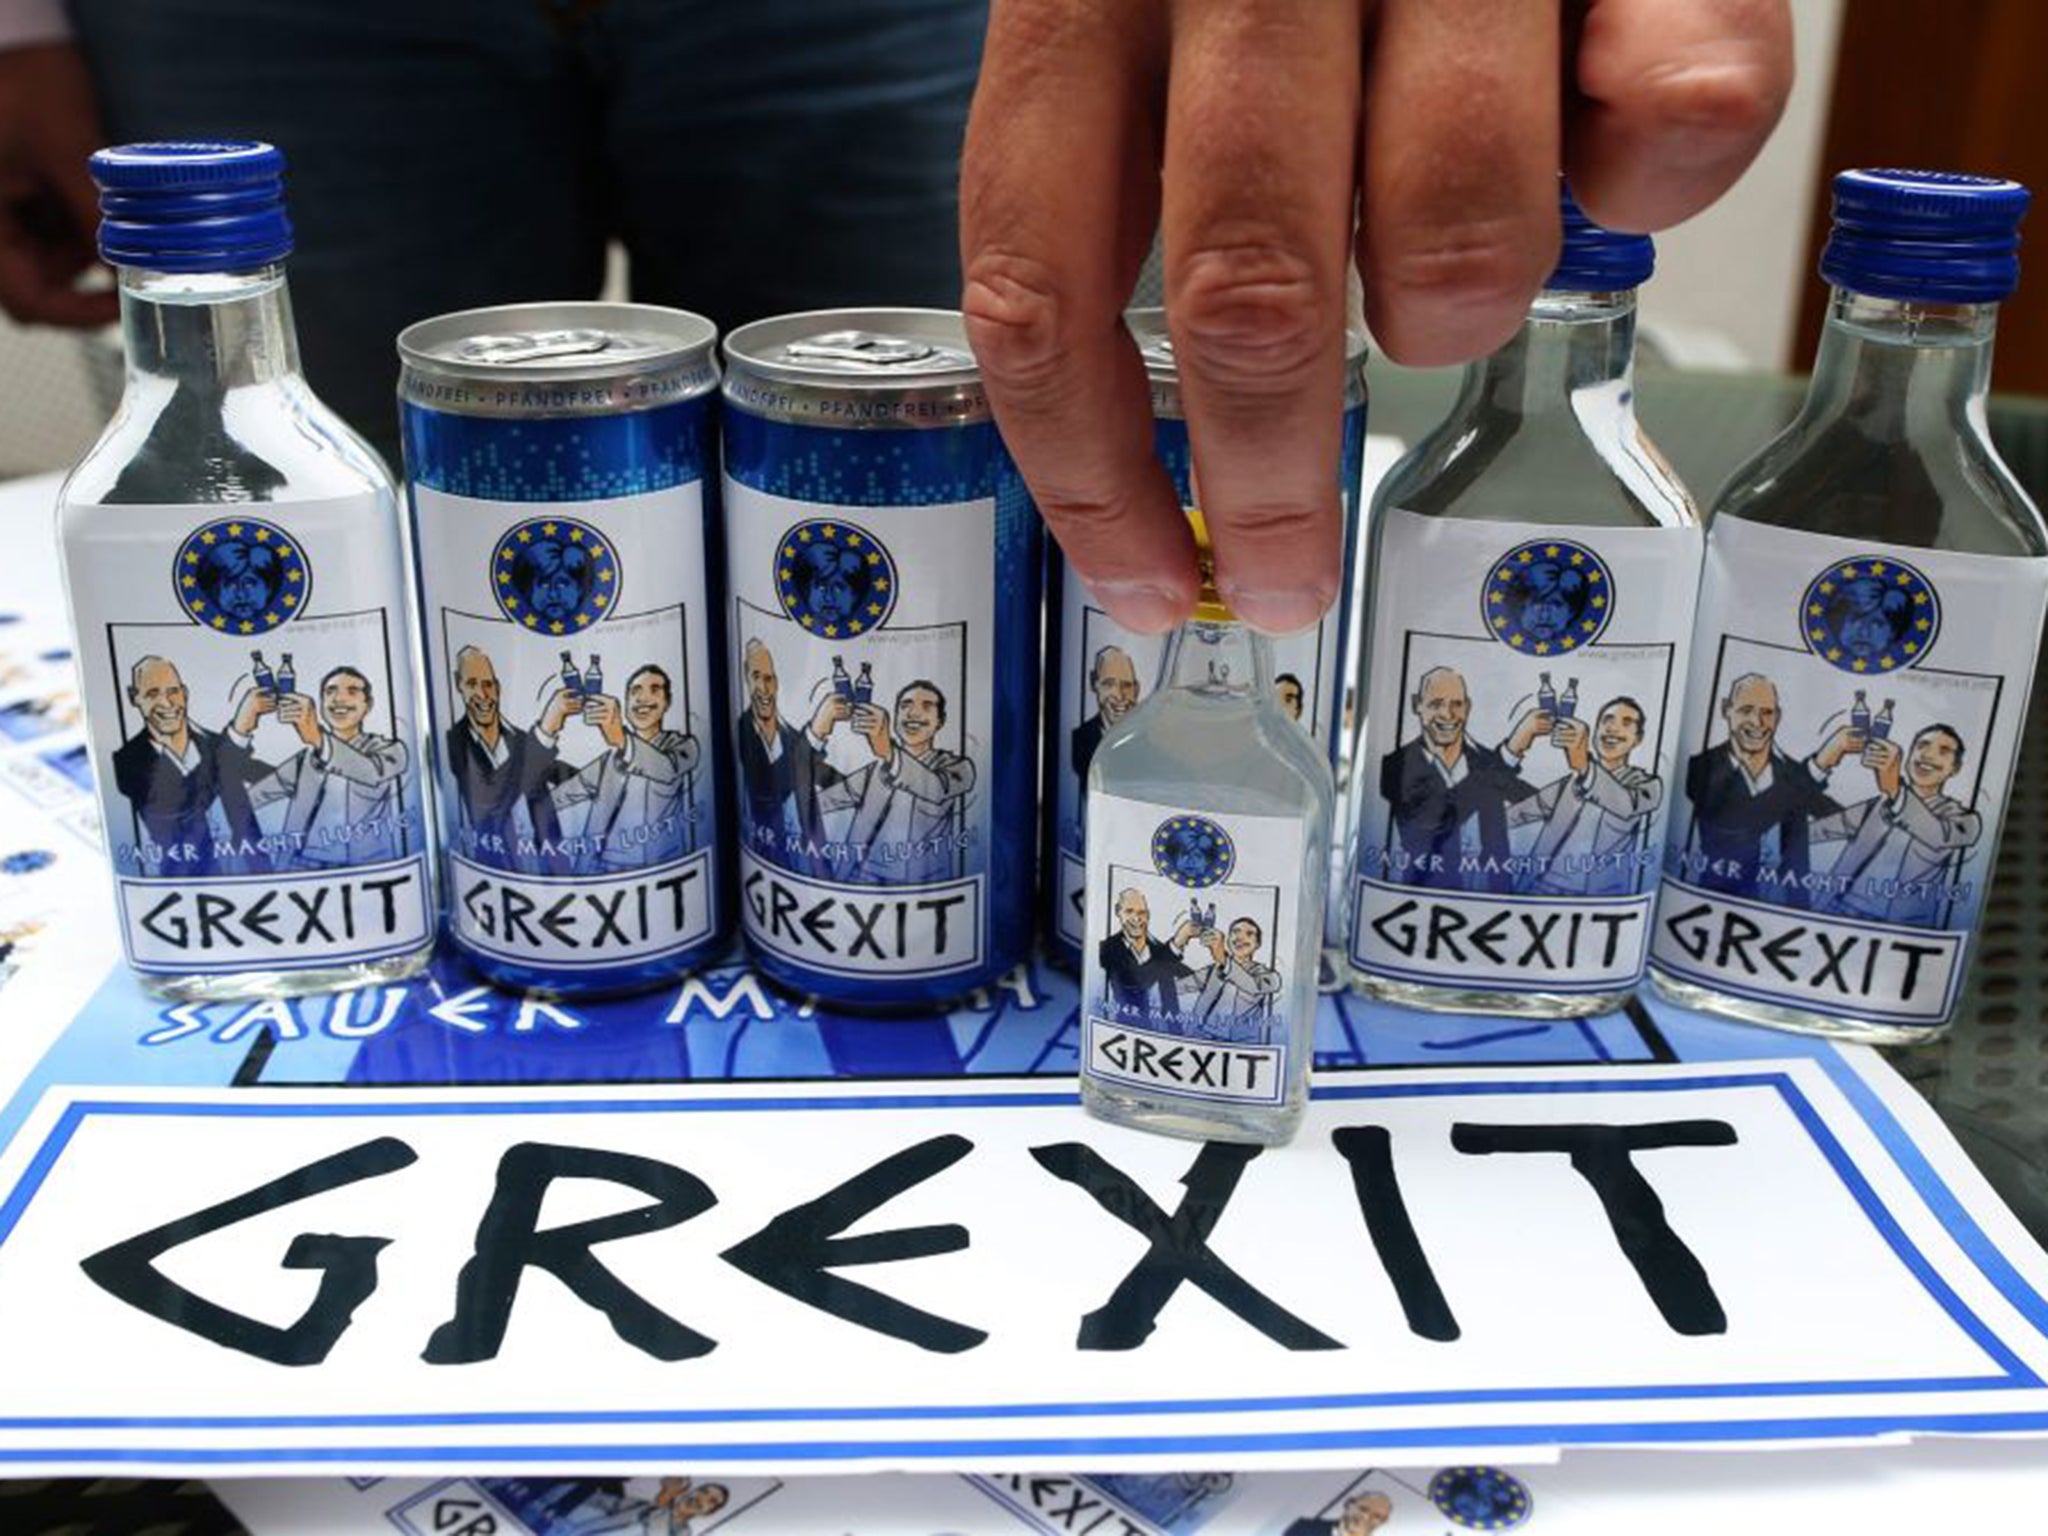 The possibility of Greece leaving the Eurozone is increasing by the day. Merchandise already exists to accompany the event